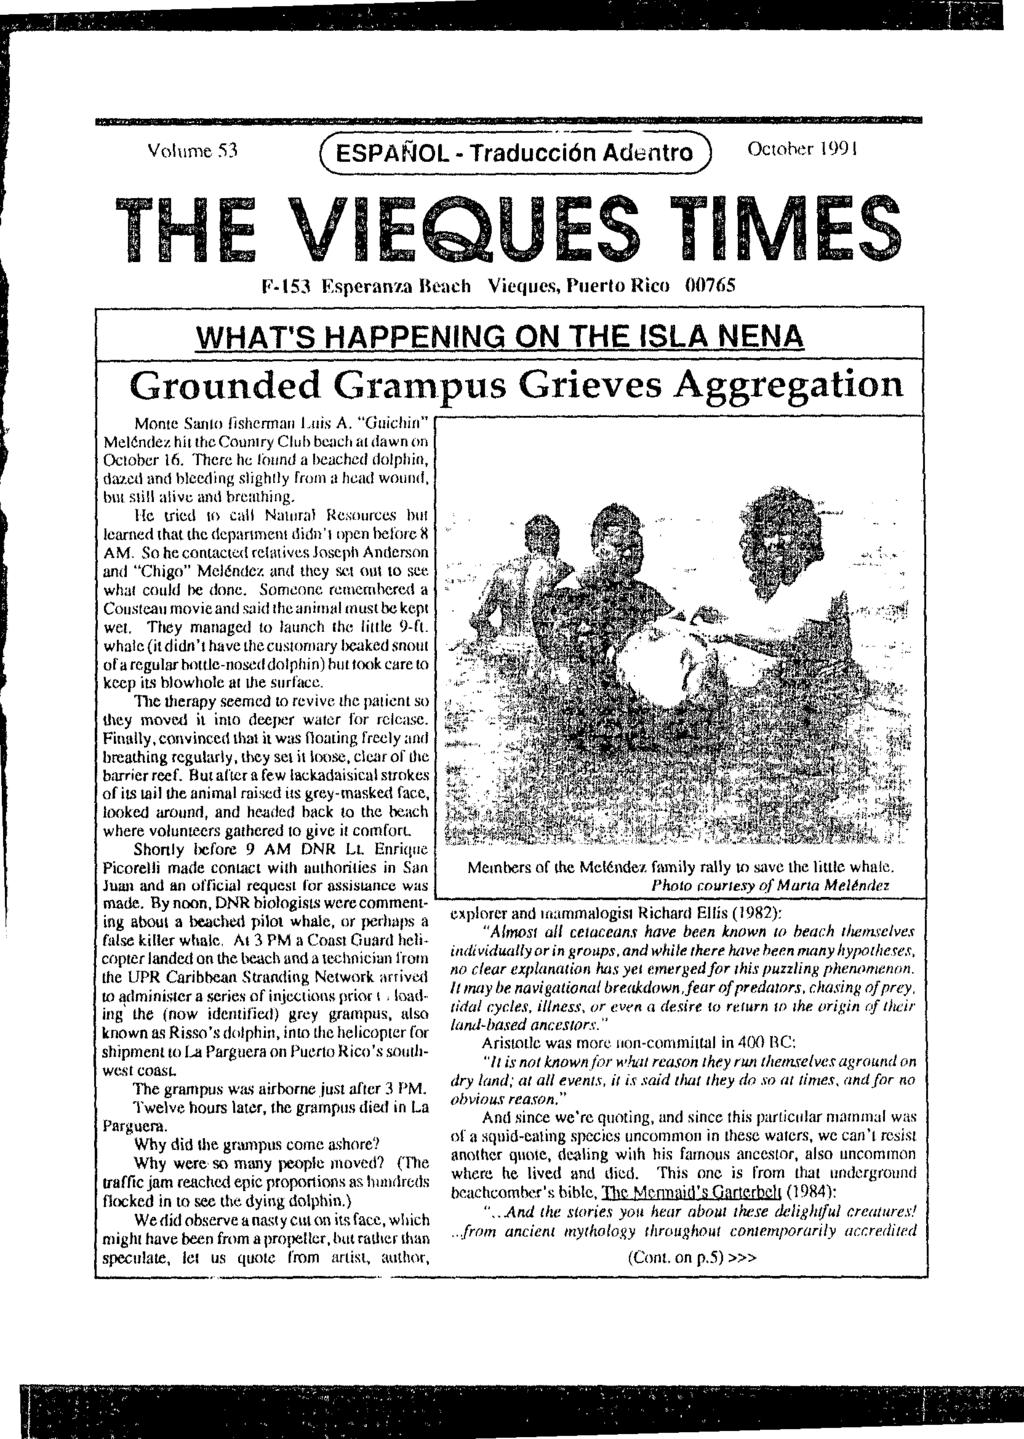 THE VIEQLIES TIMES F-153 [.speran.a Beach Vieques, Puerlo Rico 00765 WHAT S HAPPENING ON THE ISLA NENA Grounded Gram: 9us Grieves Aggregation Monte Smile tisherman Luis A.